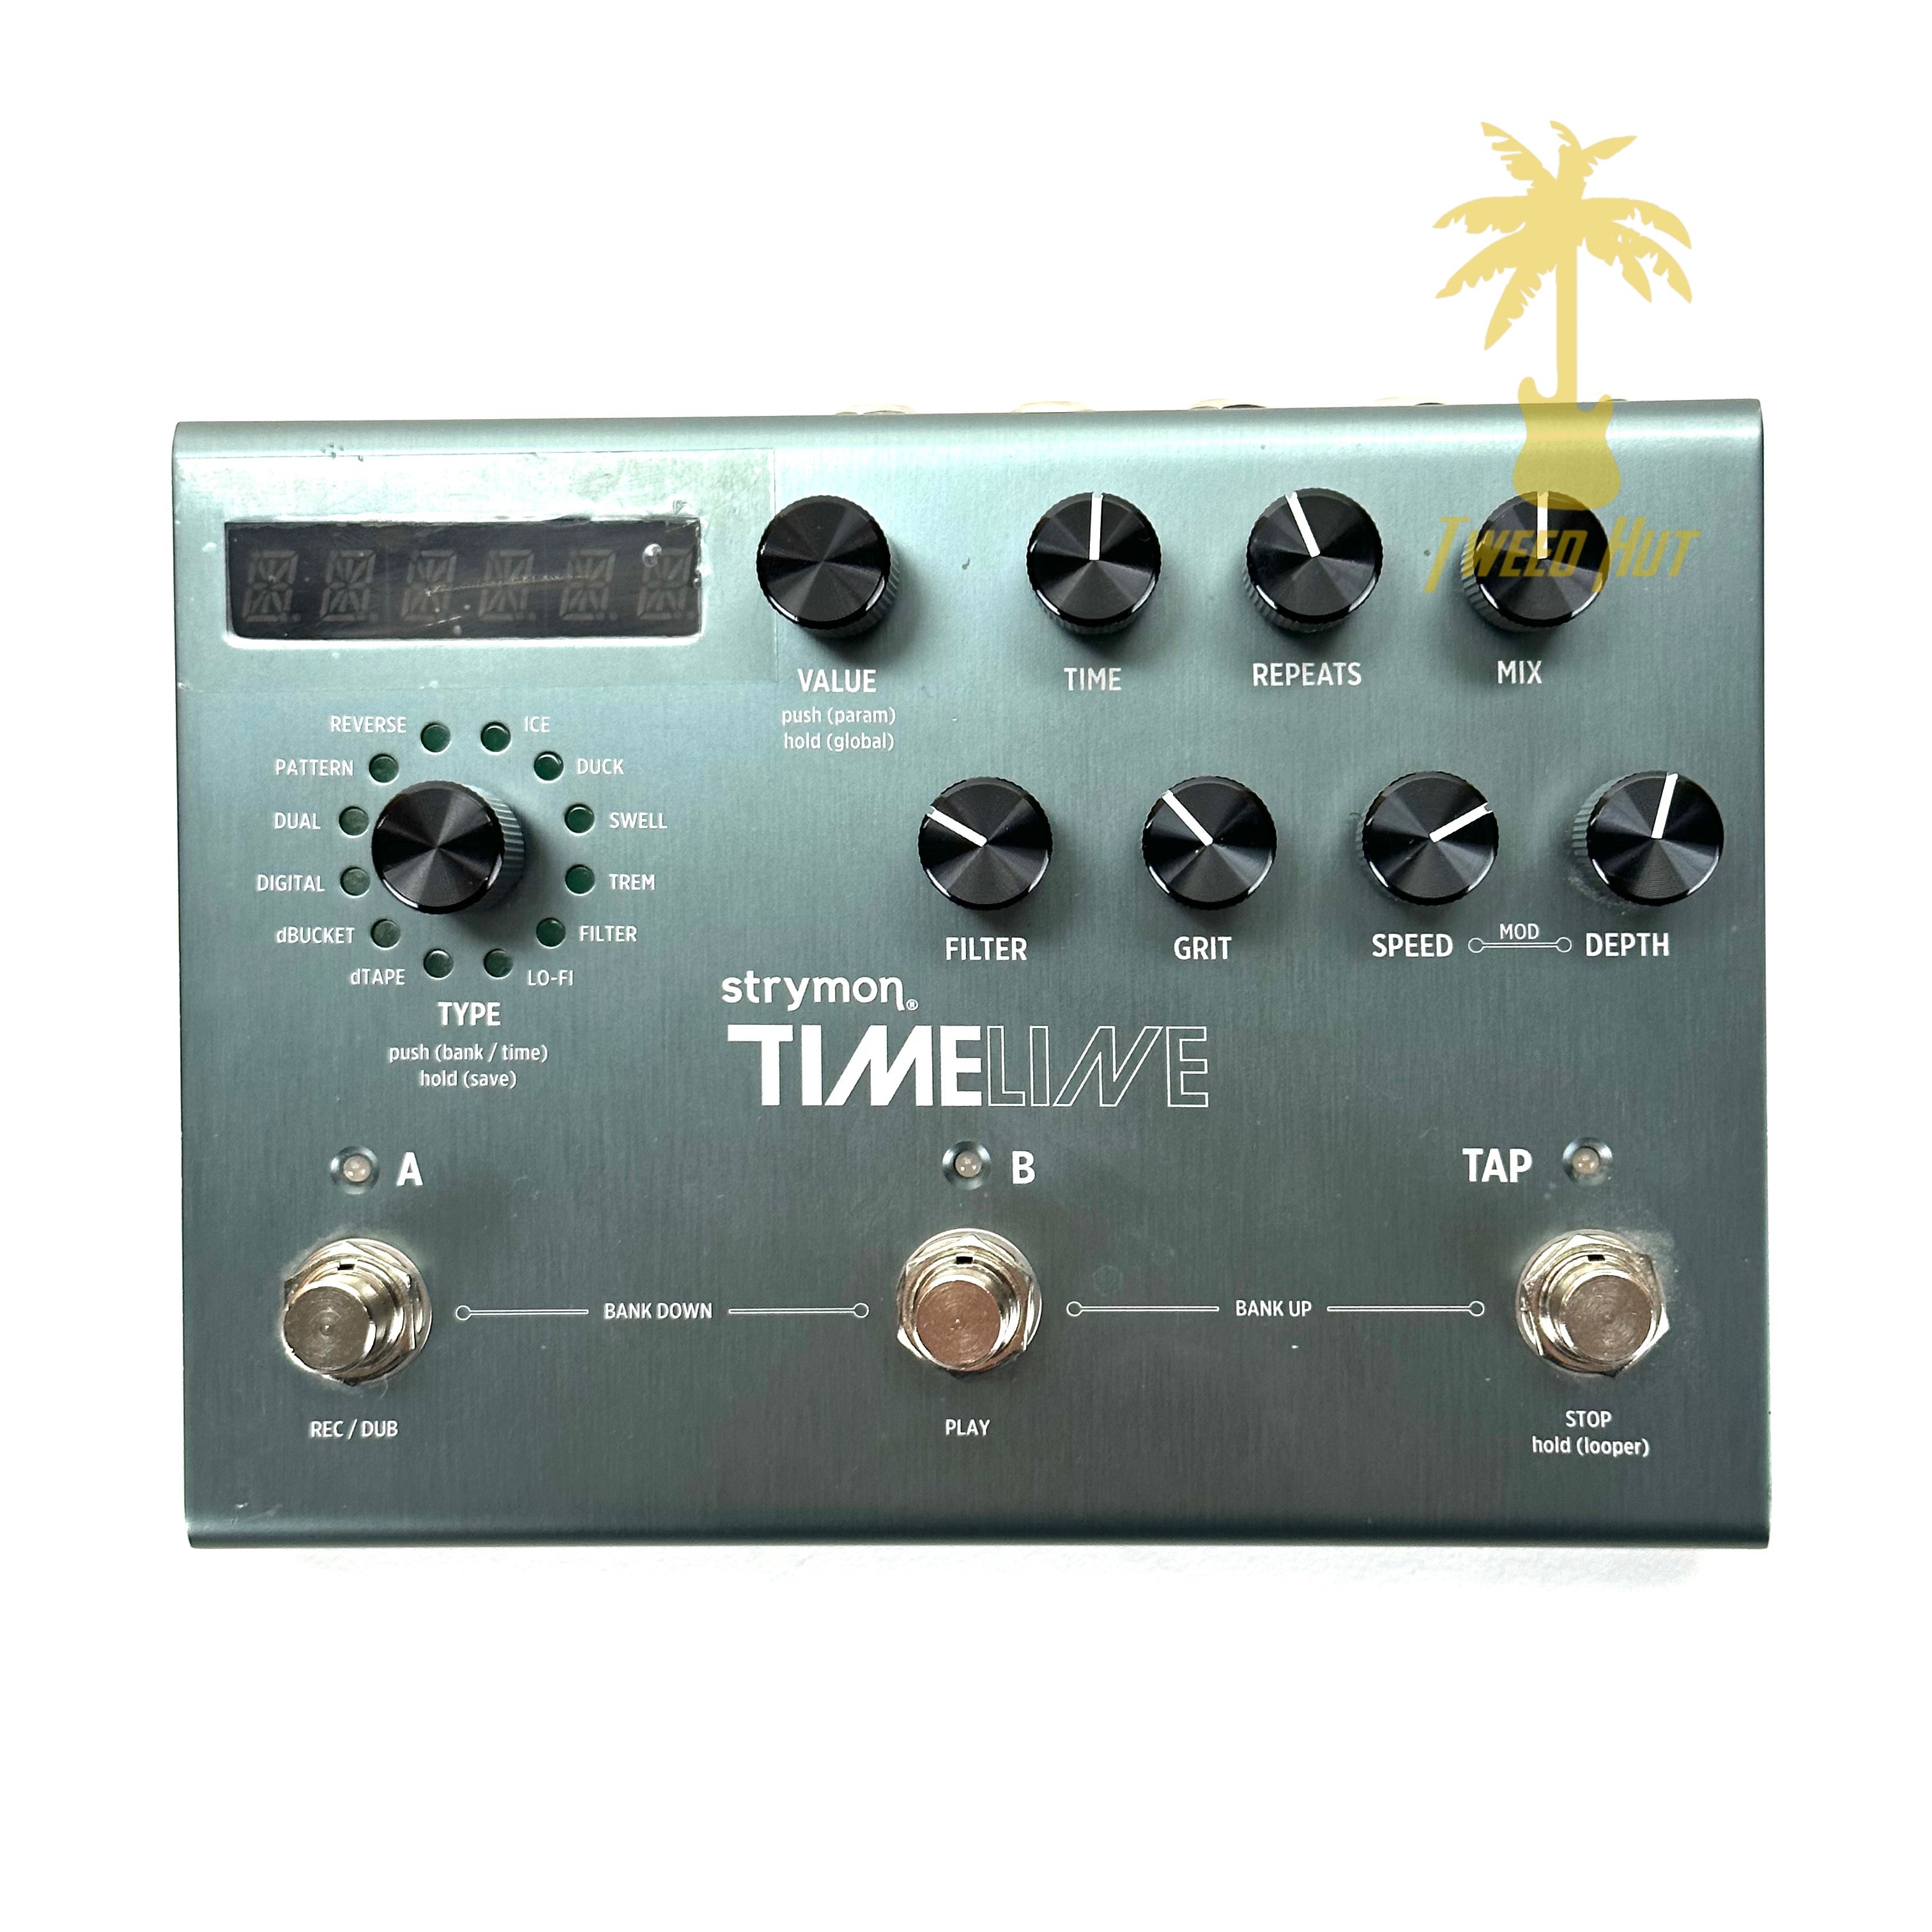 PRE-OWNED STRYMON TIMELINE DELAY PEDAL